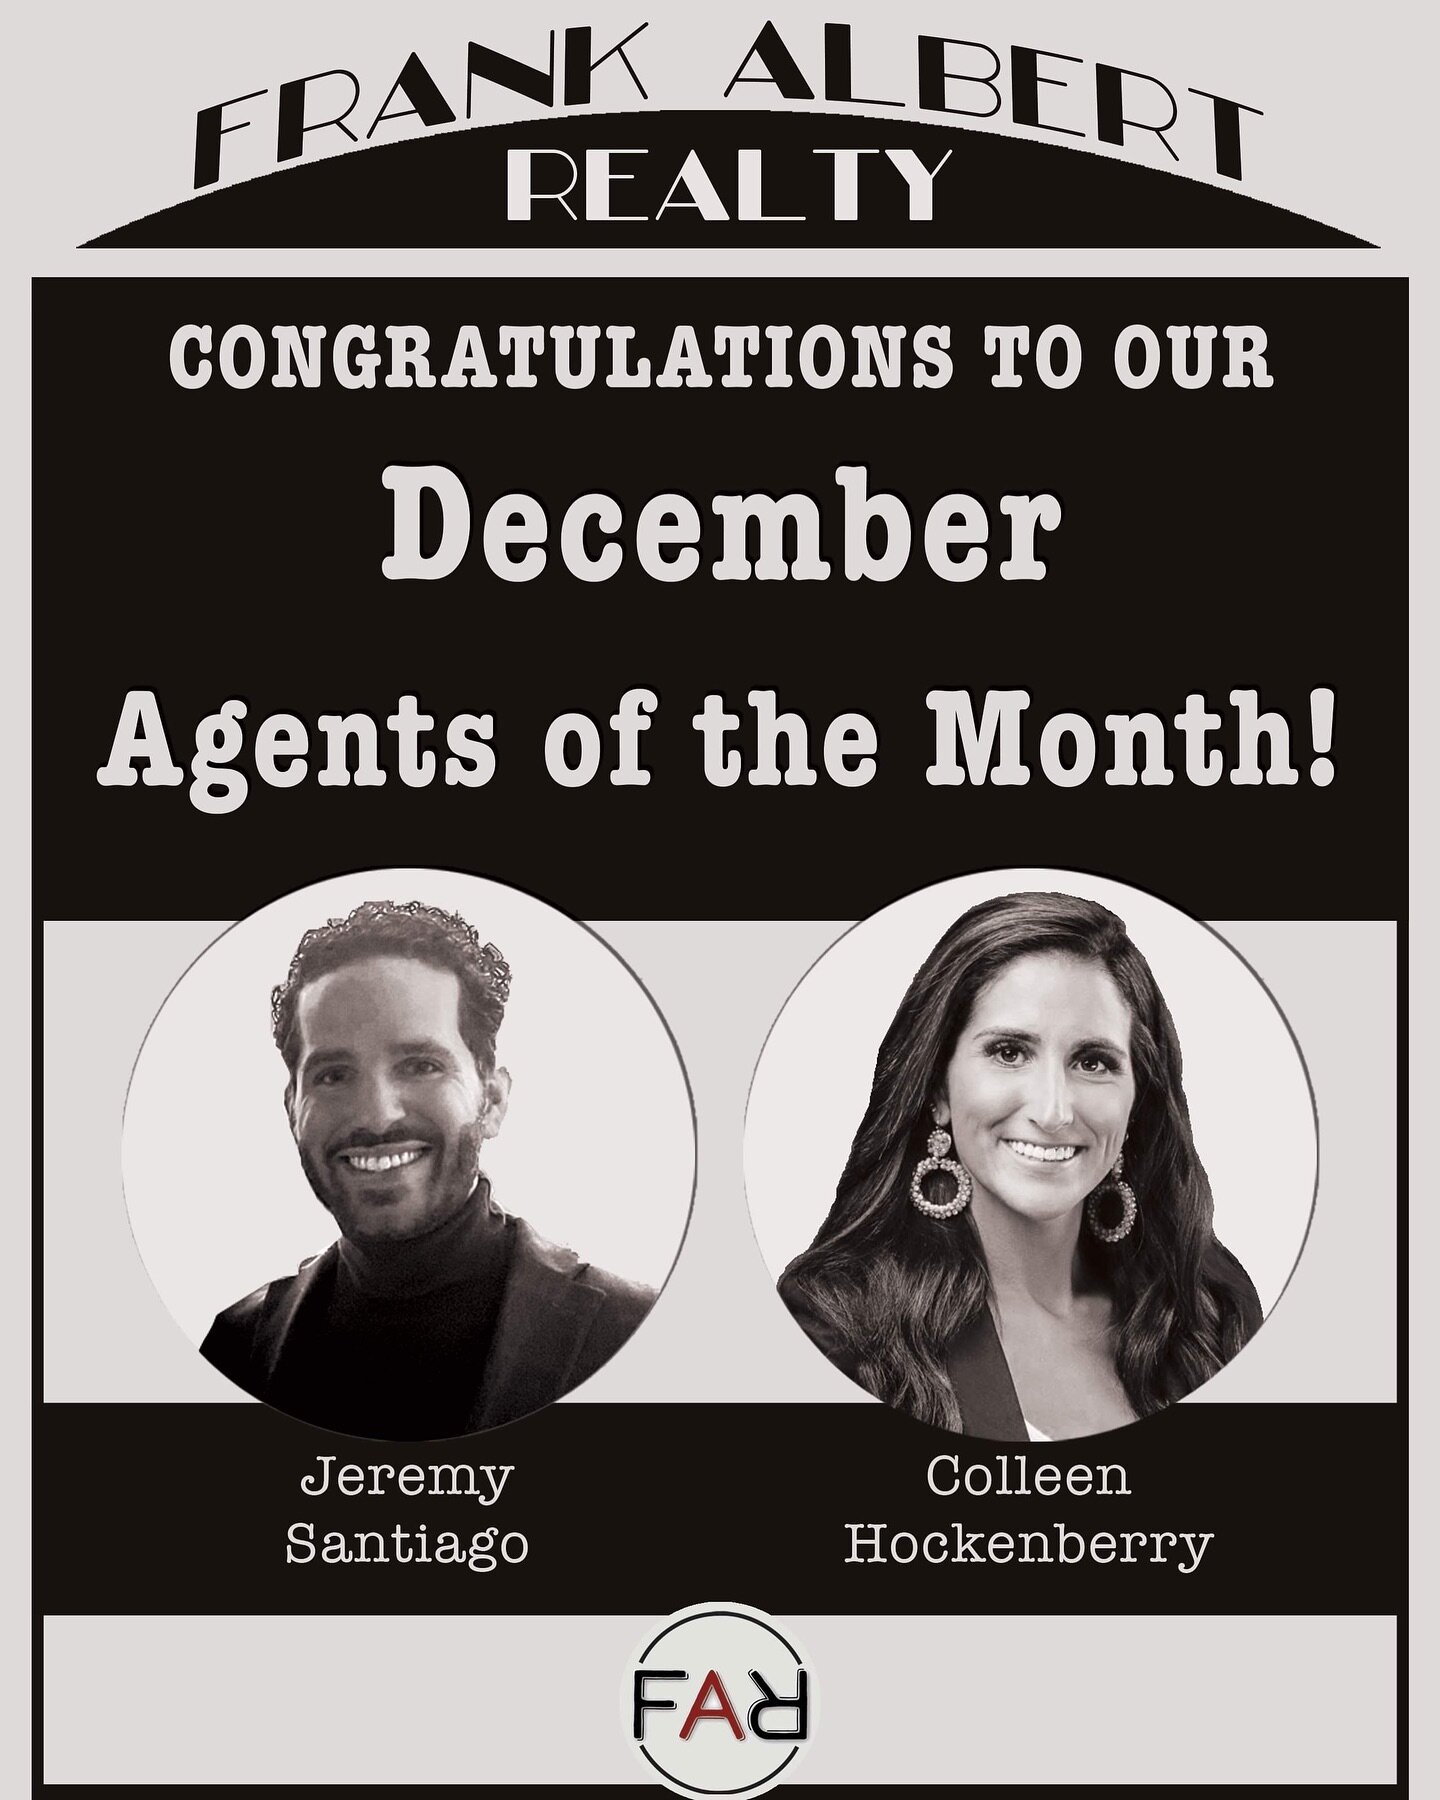 Shoutout to @multifamilyman and @colleentheresa_realtor for being agents of the month for December!!! 🥳